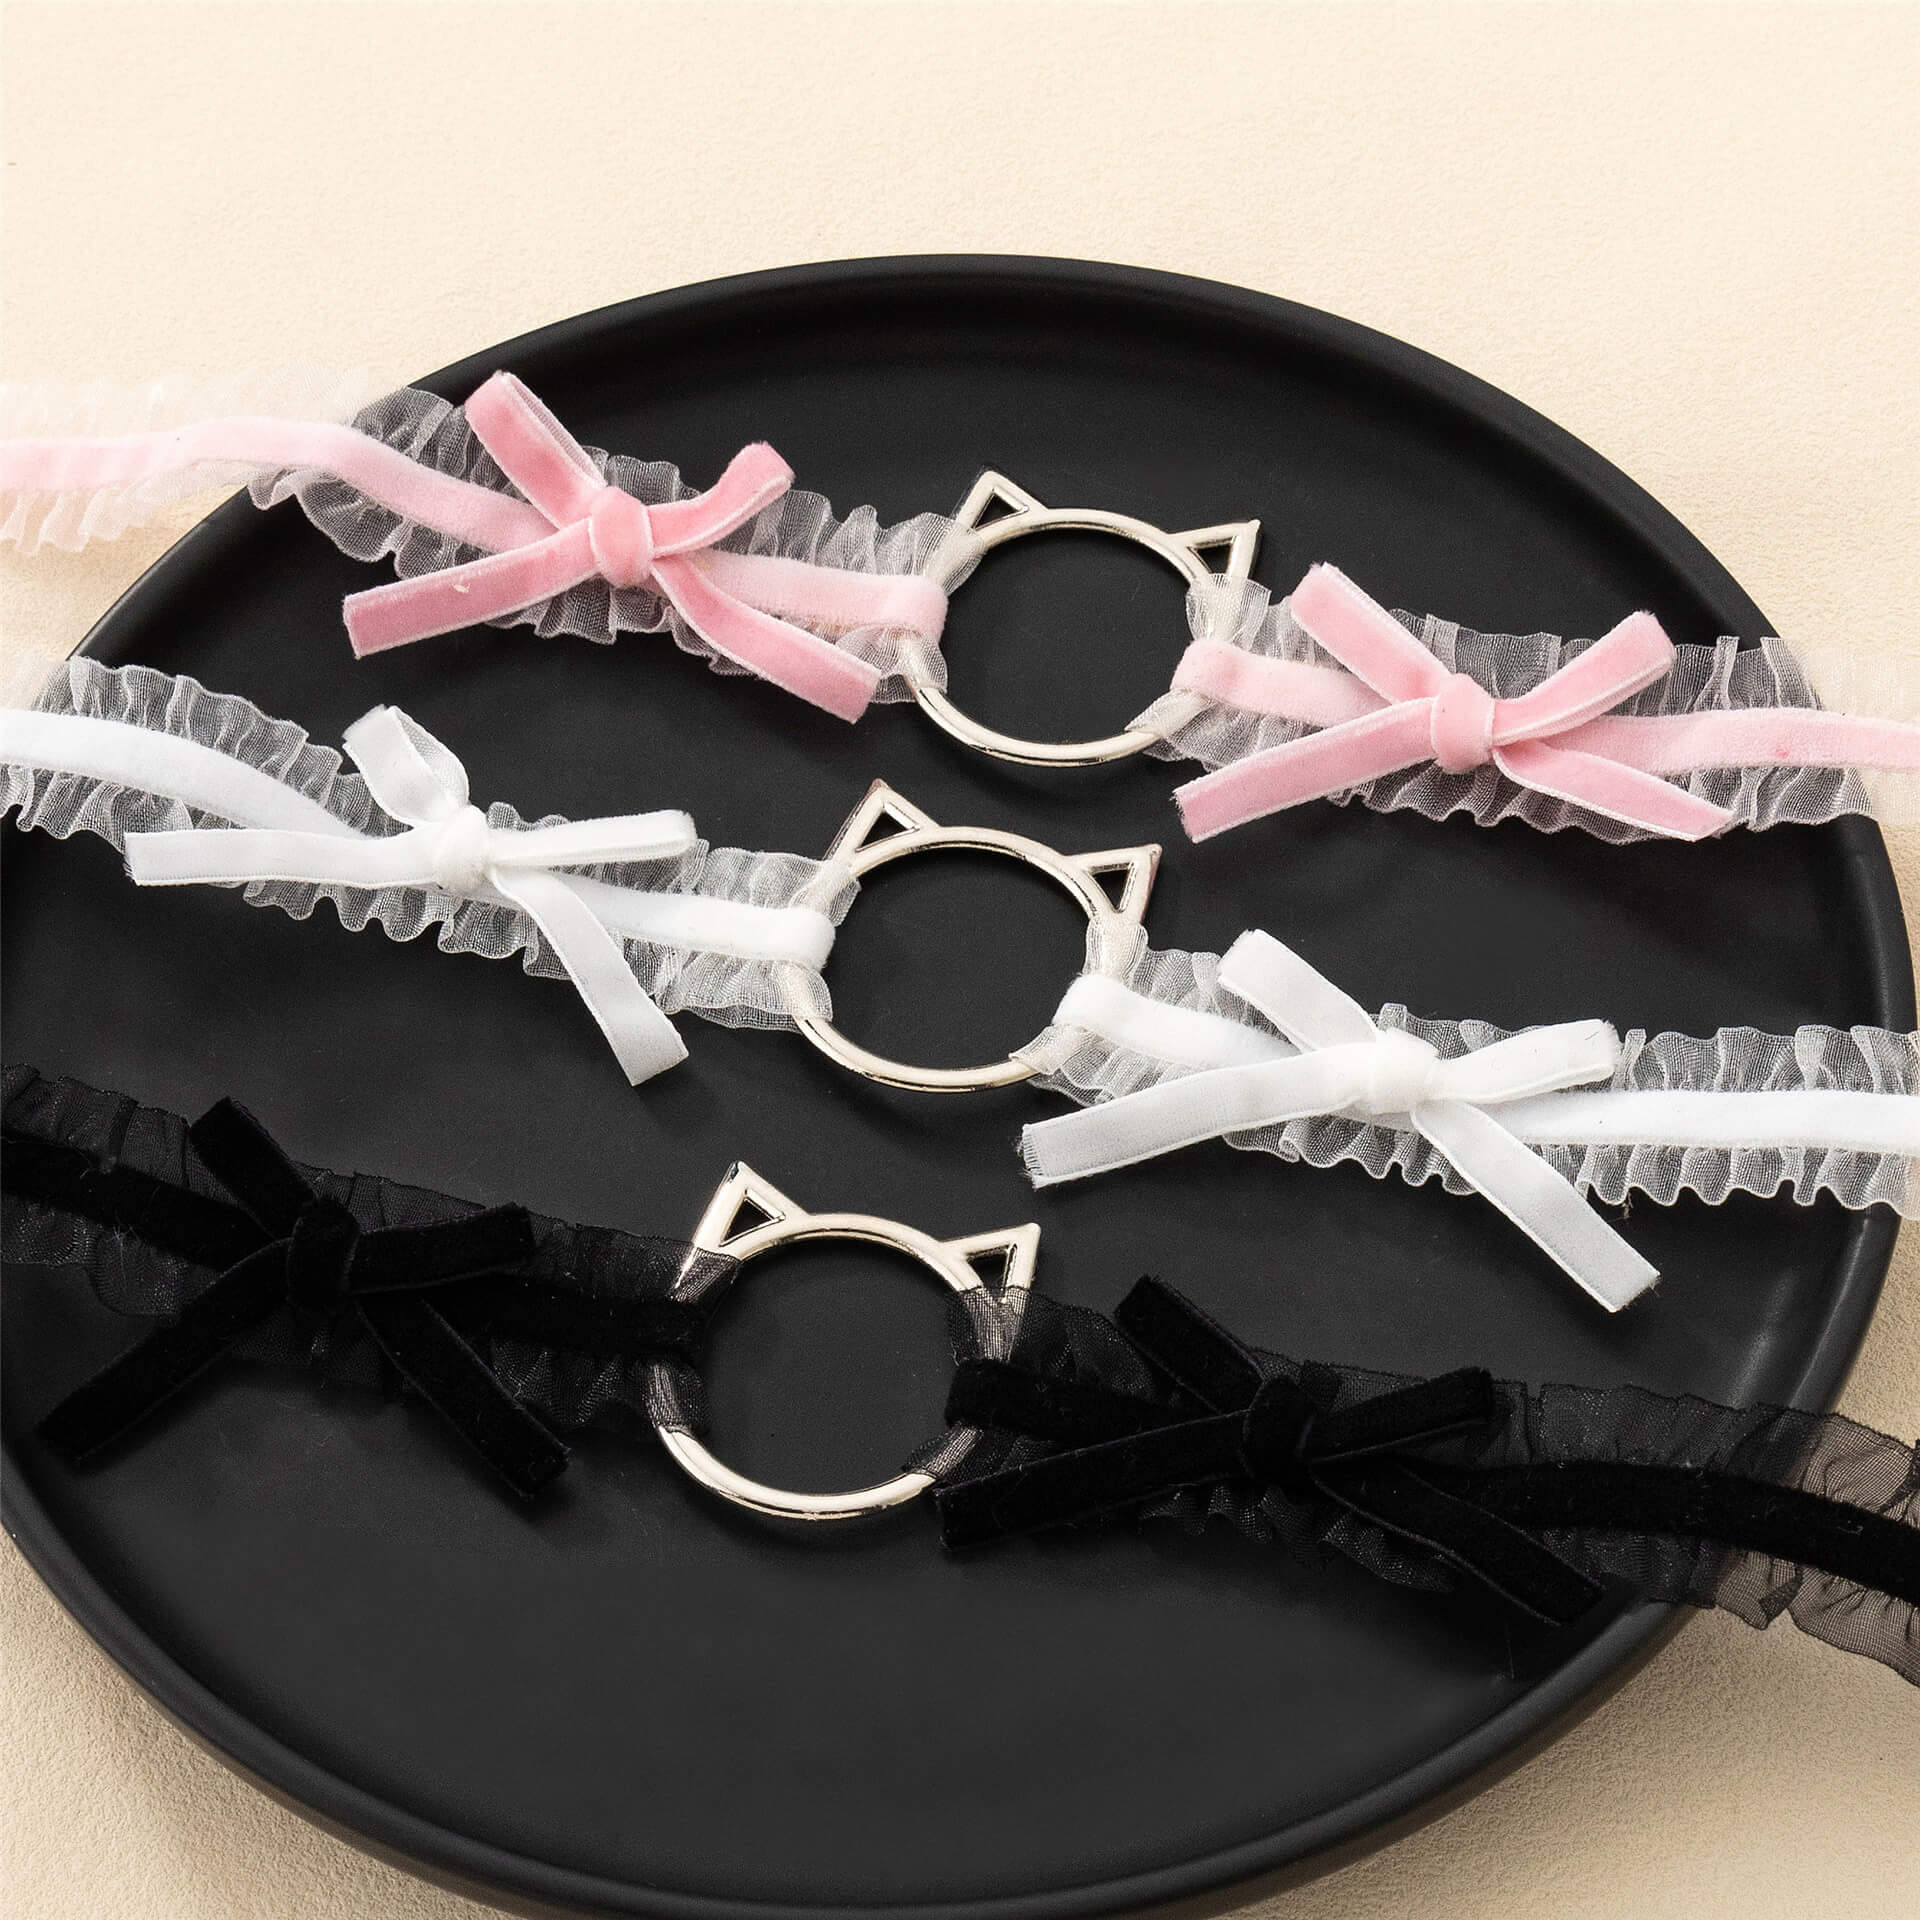 Kitty Choker With Bow for Femboy - Femboy Fashion